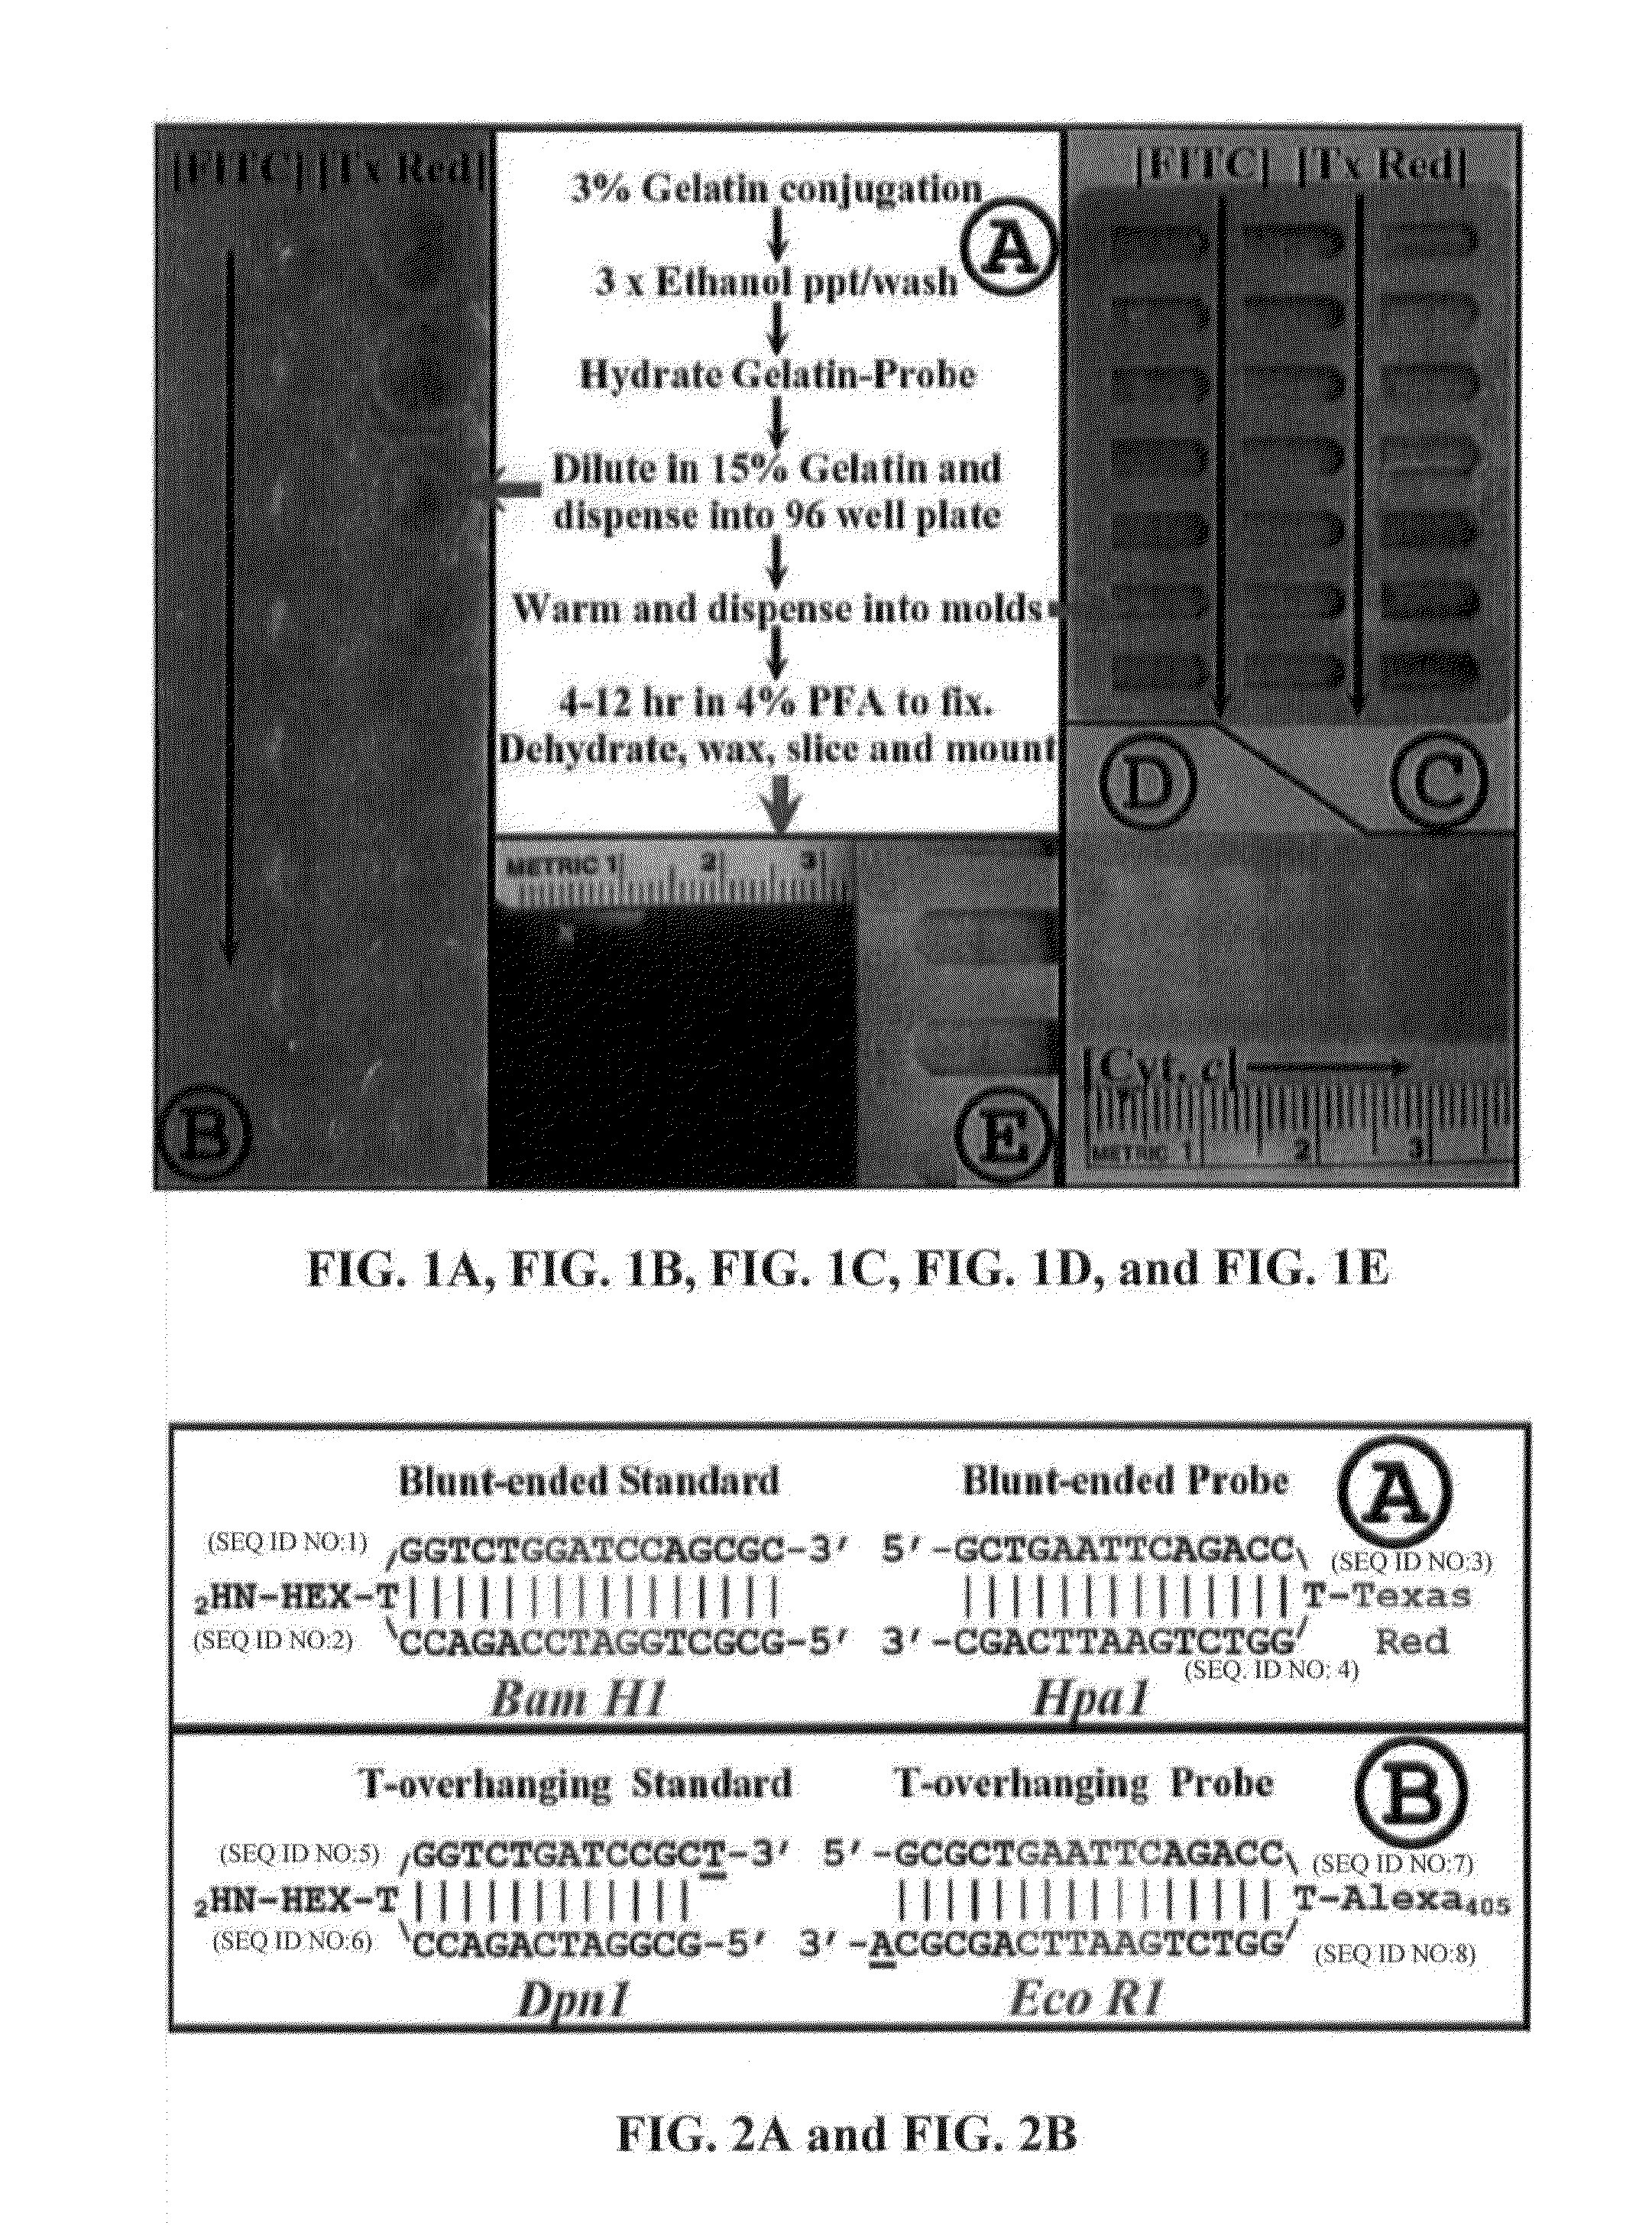 Compositions and Methods for Quantitative Histology, Calibration of Images in Fluorescence Microscopy, and ddTUNEL Analyses